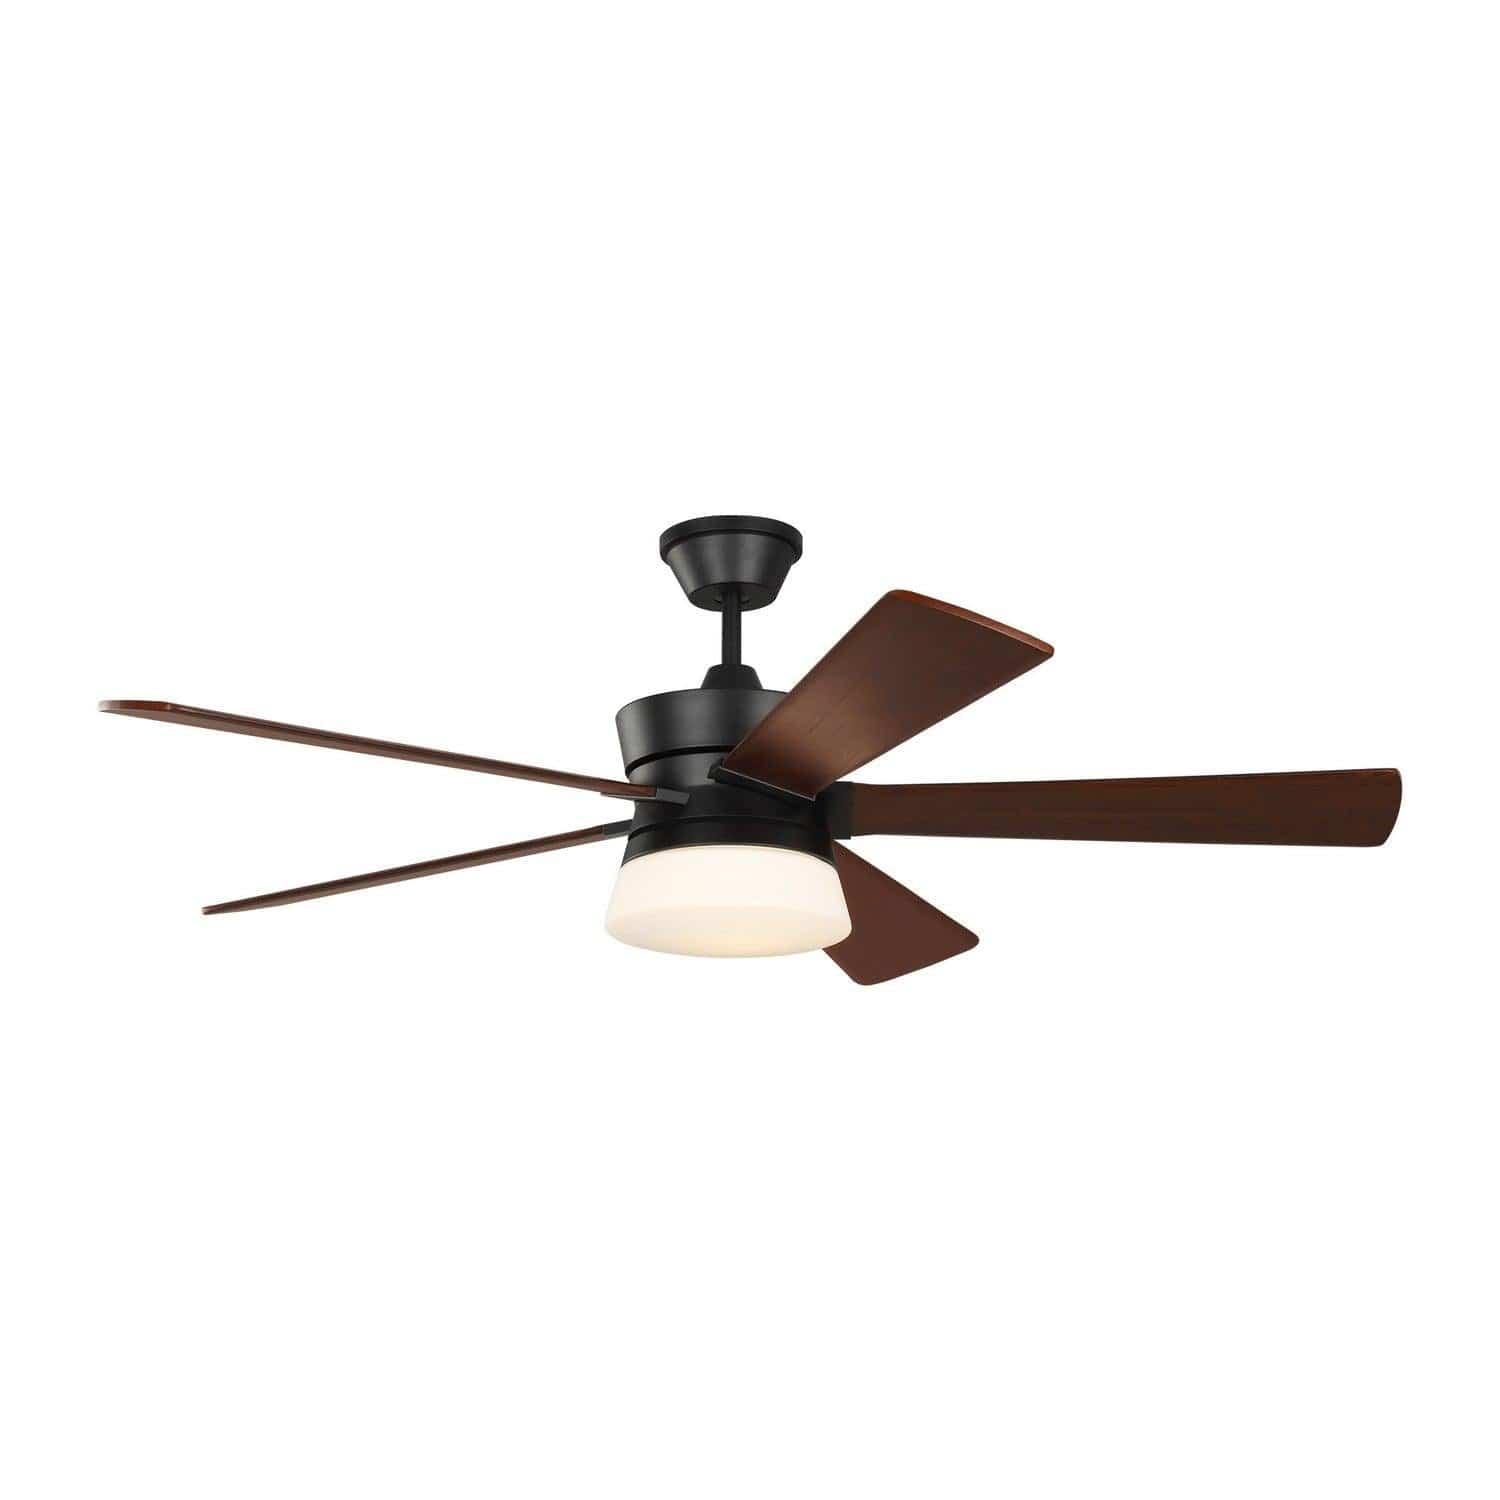 Visual Comfort Fan Collection - Atlantic 56" Ceiling Fan - 5ATR56MBKD | Montreal Lighting & Hardware